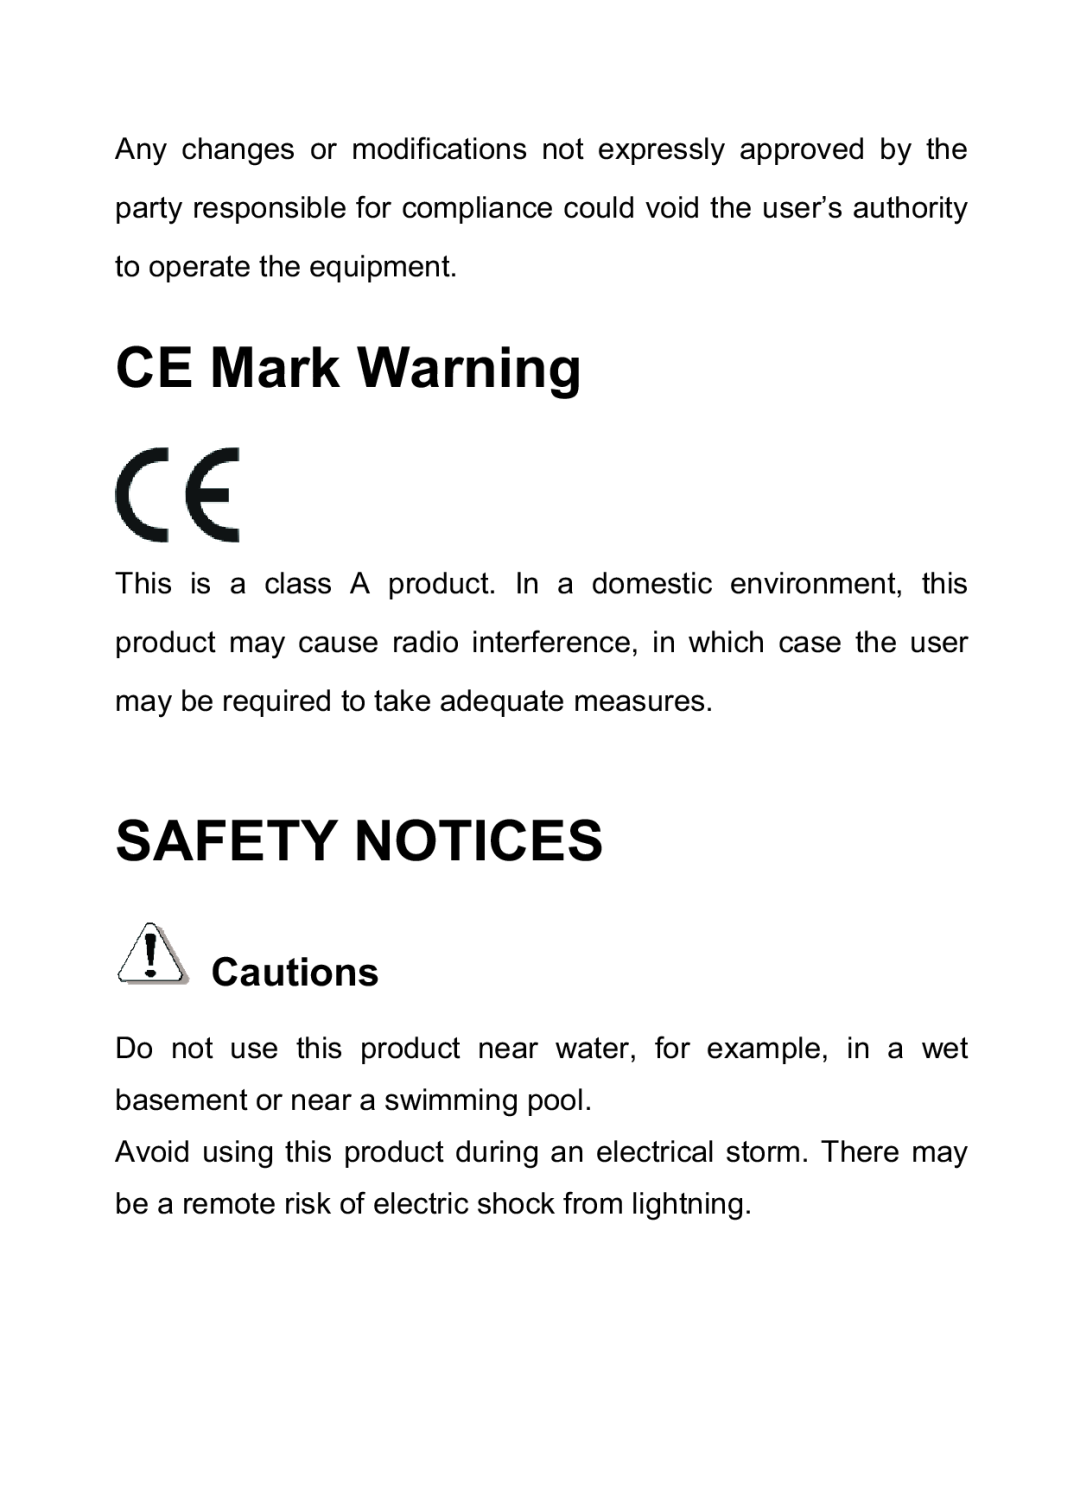 TP-Link TL-SG1008P manual CE Mark Warning, Safety Notices, Cautions 